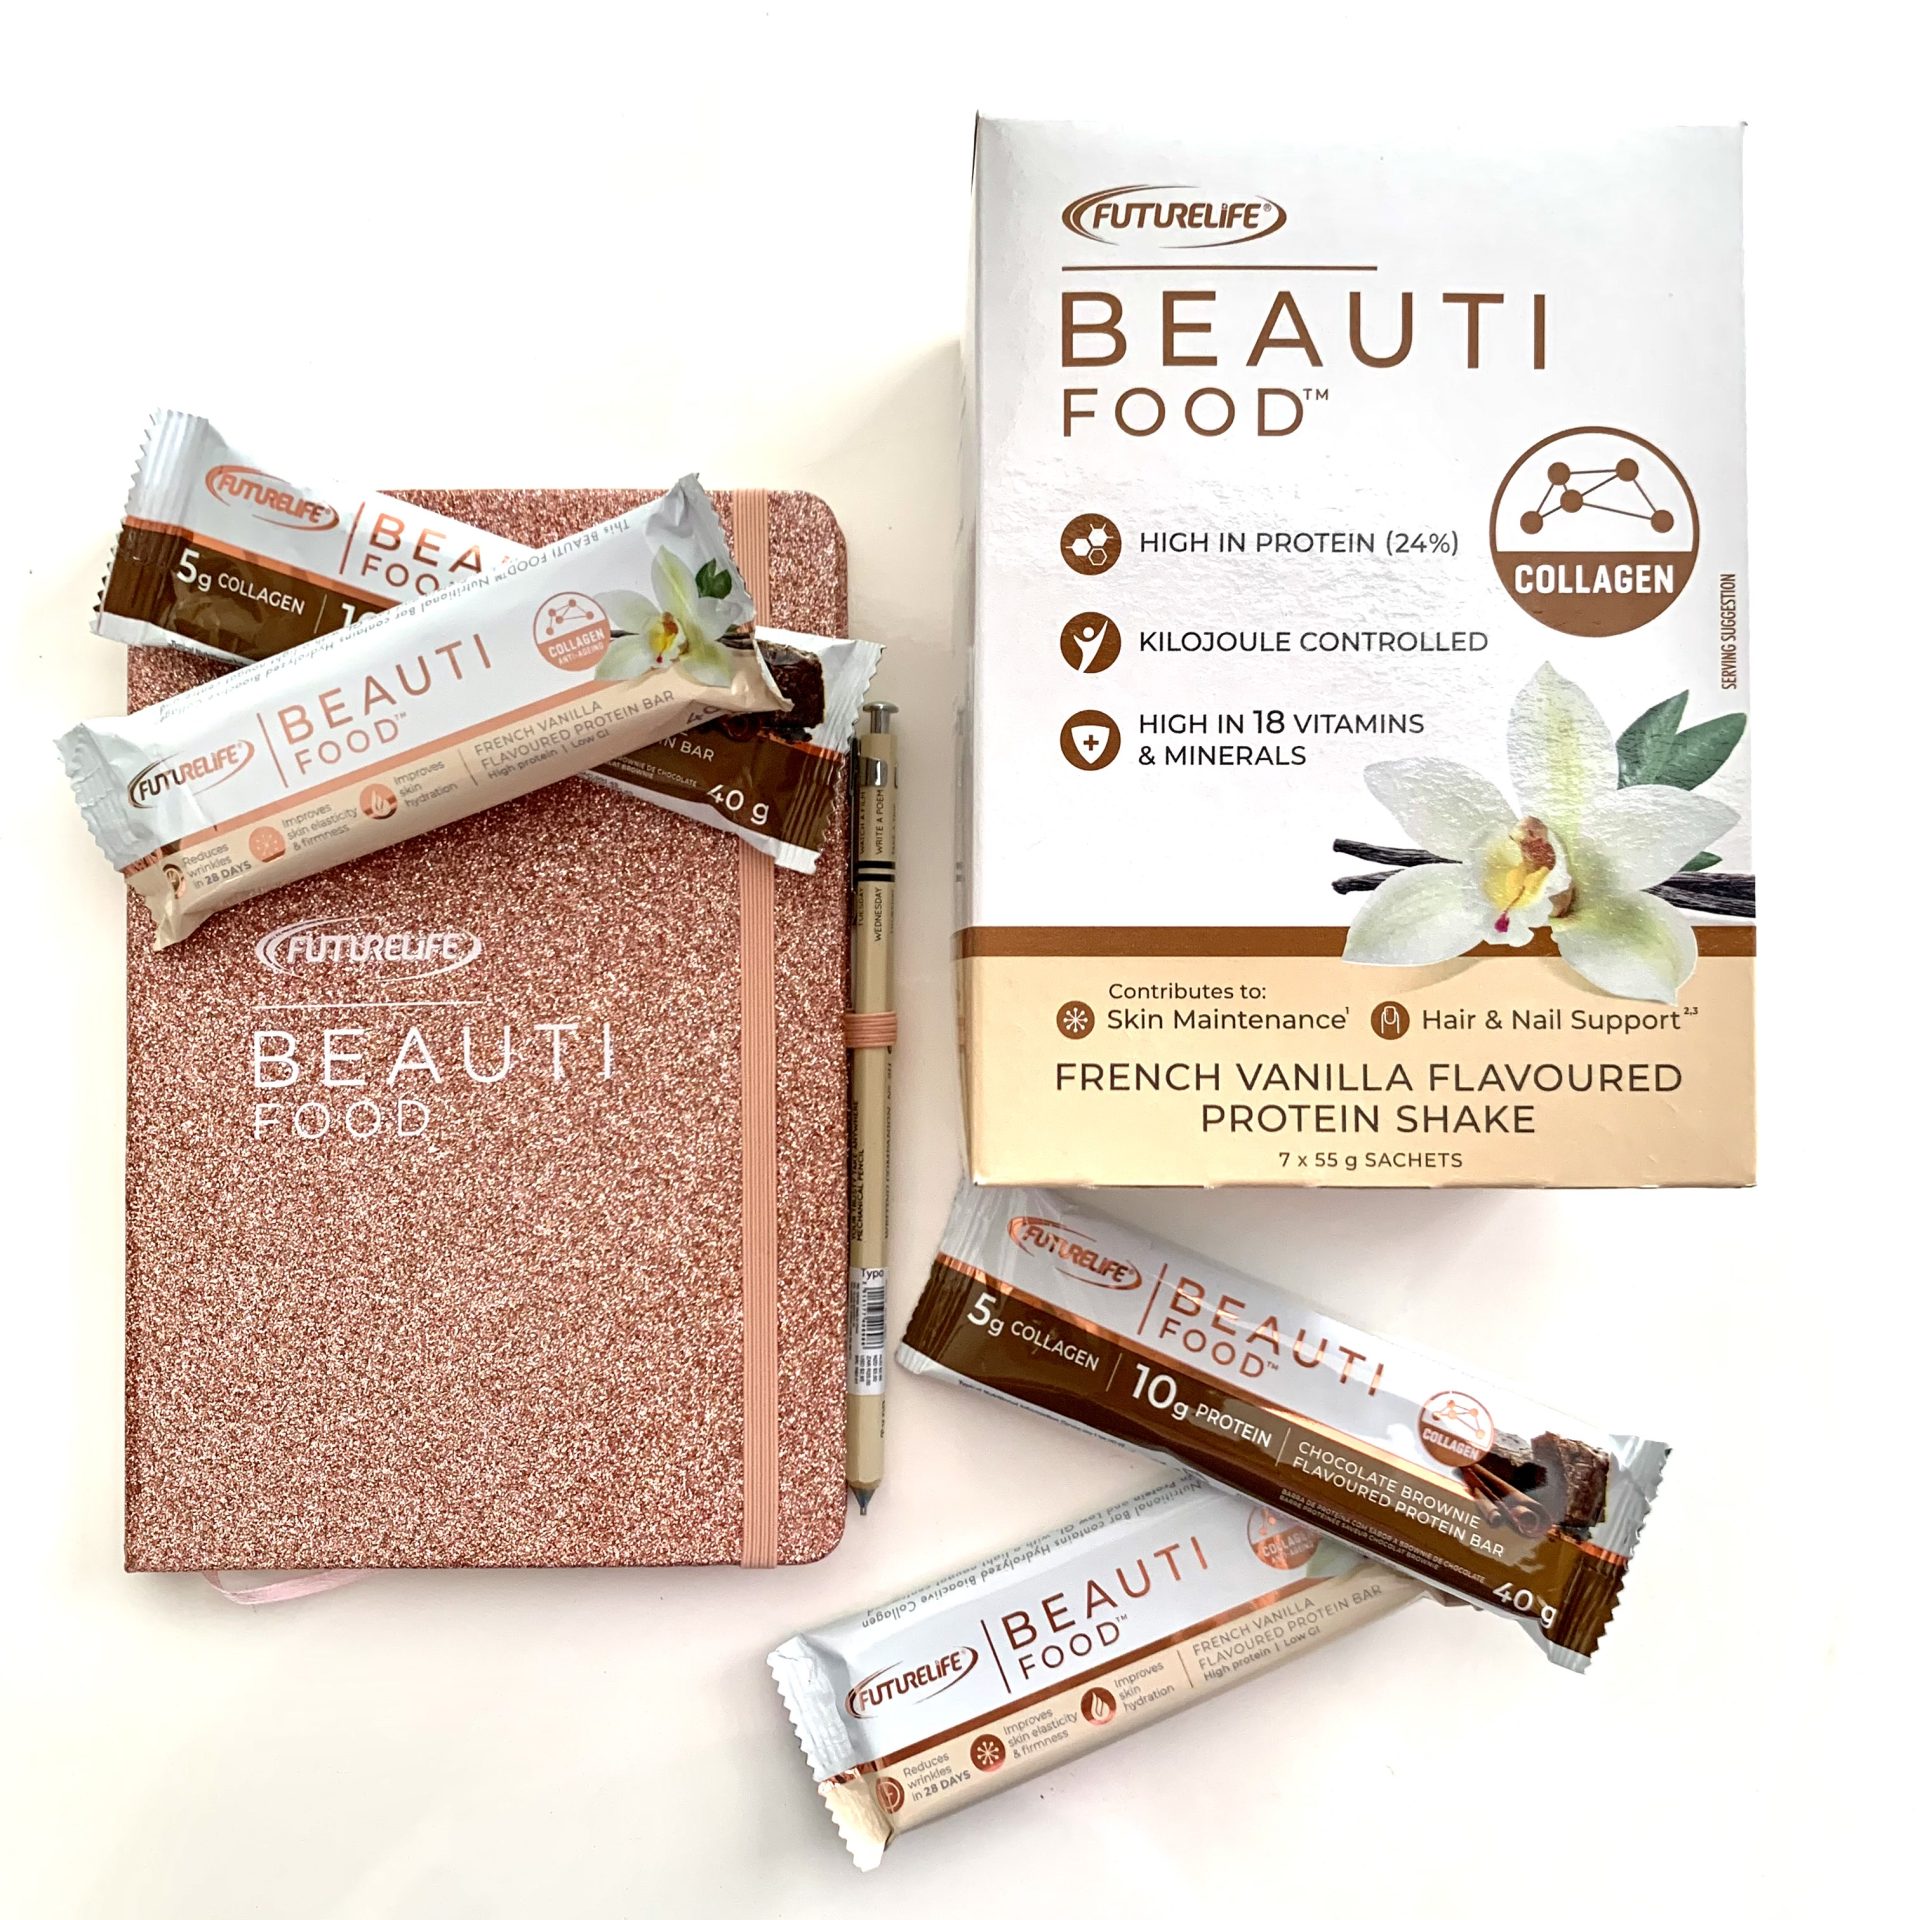 We review FUTURELIFE® BEAUTI FOOD™ Nutritional Shake and Protein Bars 2